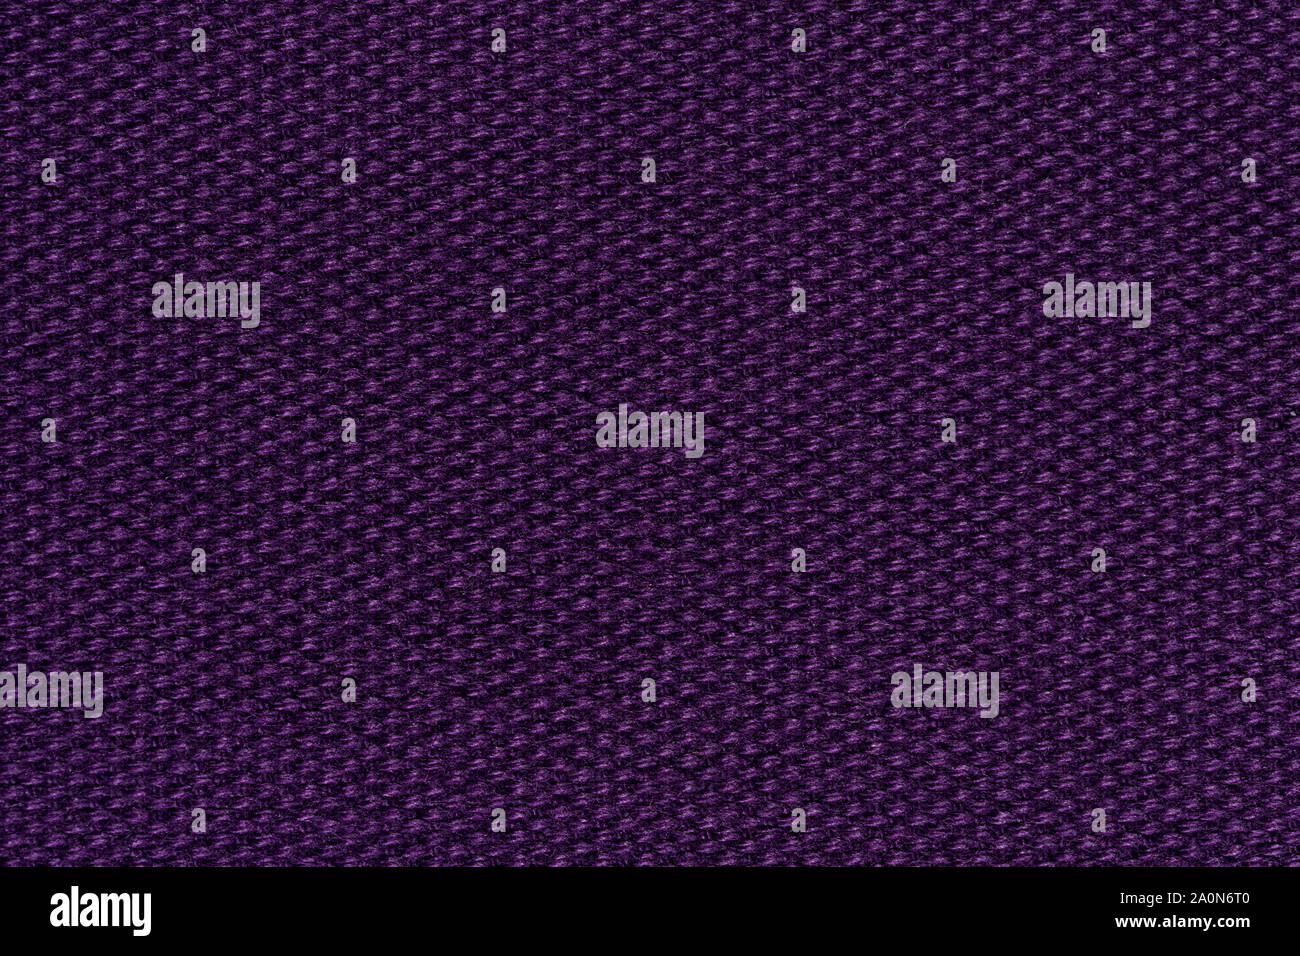 Exquisite dark textile background for your imagine. Can be used for web templates, artworks. Stock Photo